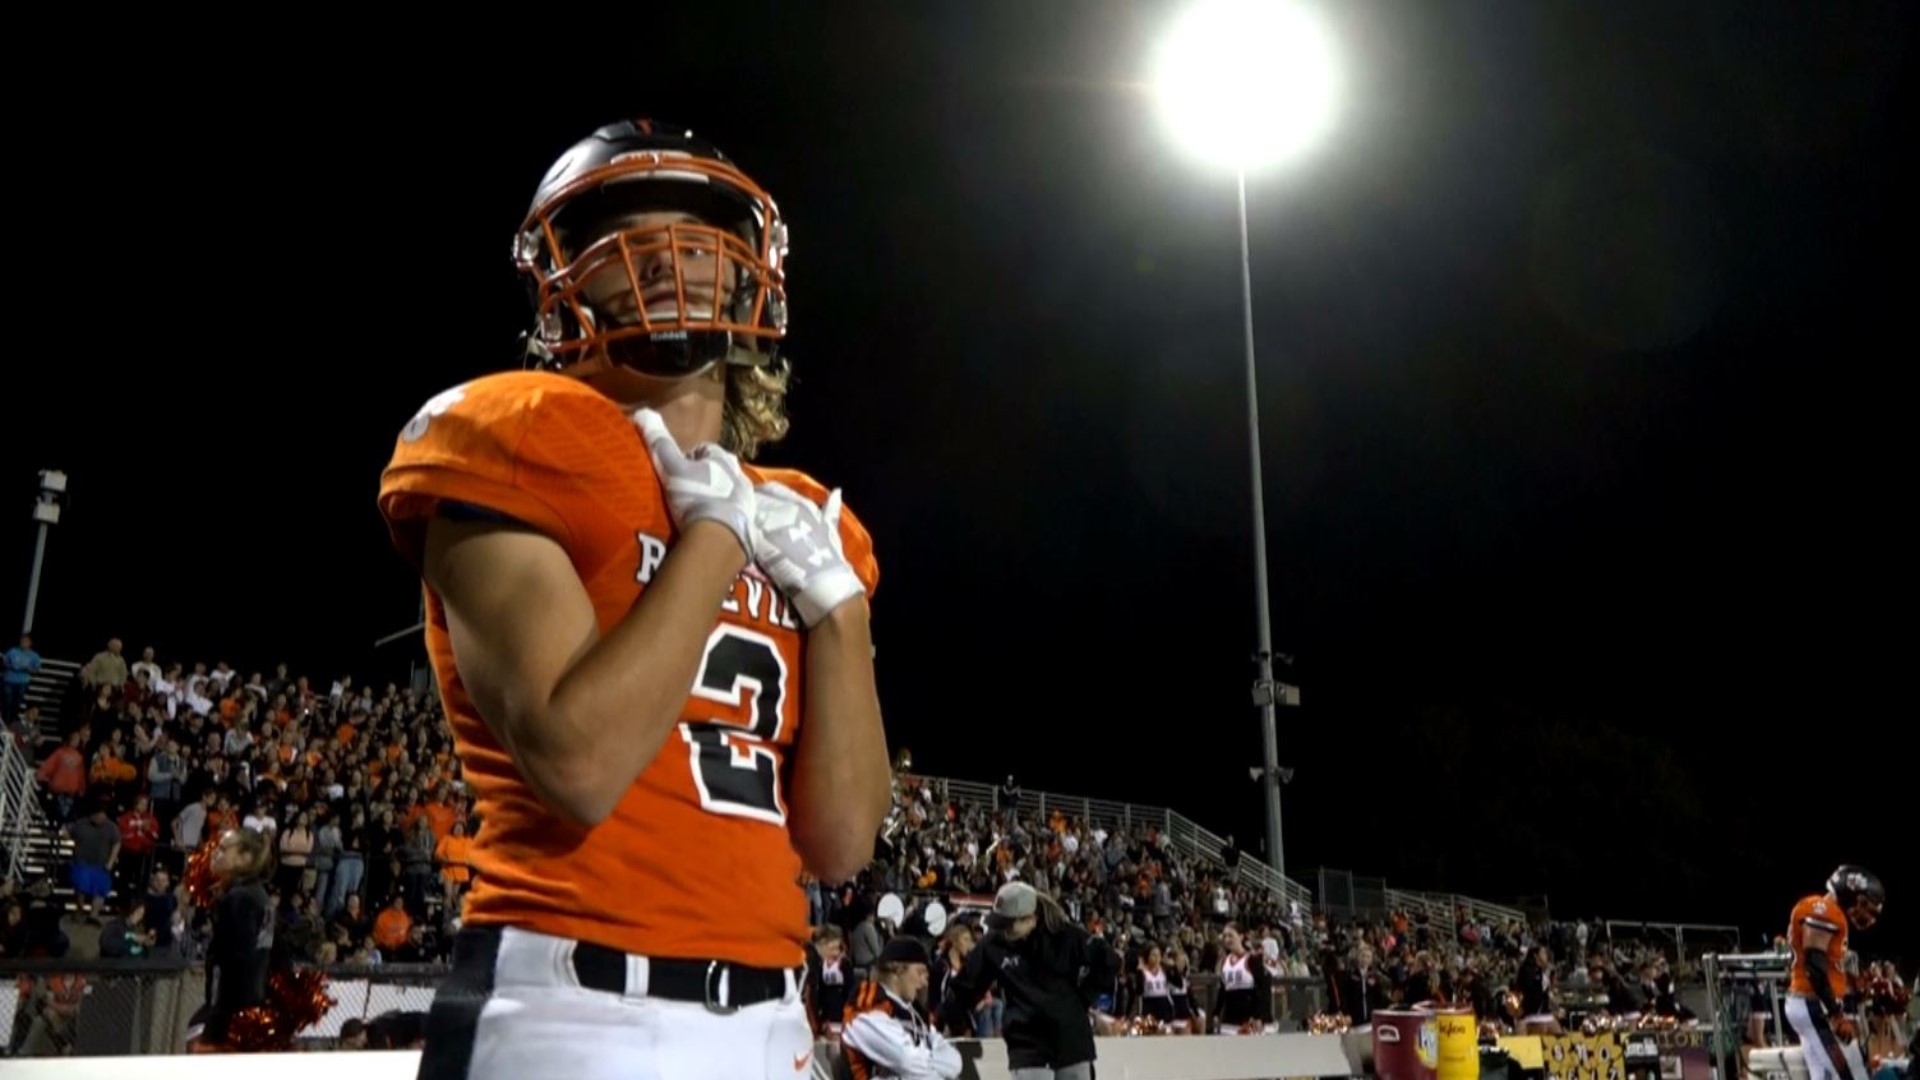 The Roseville Tigers picked up their fourth win of the season by mauling the Antelope Titans 35-7 on Friday night.